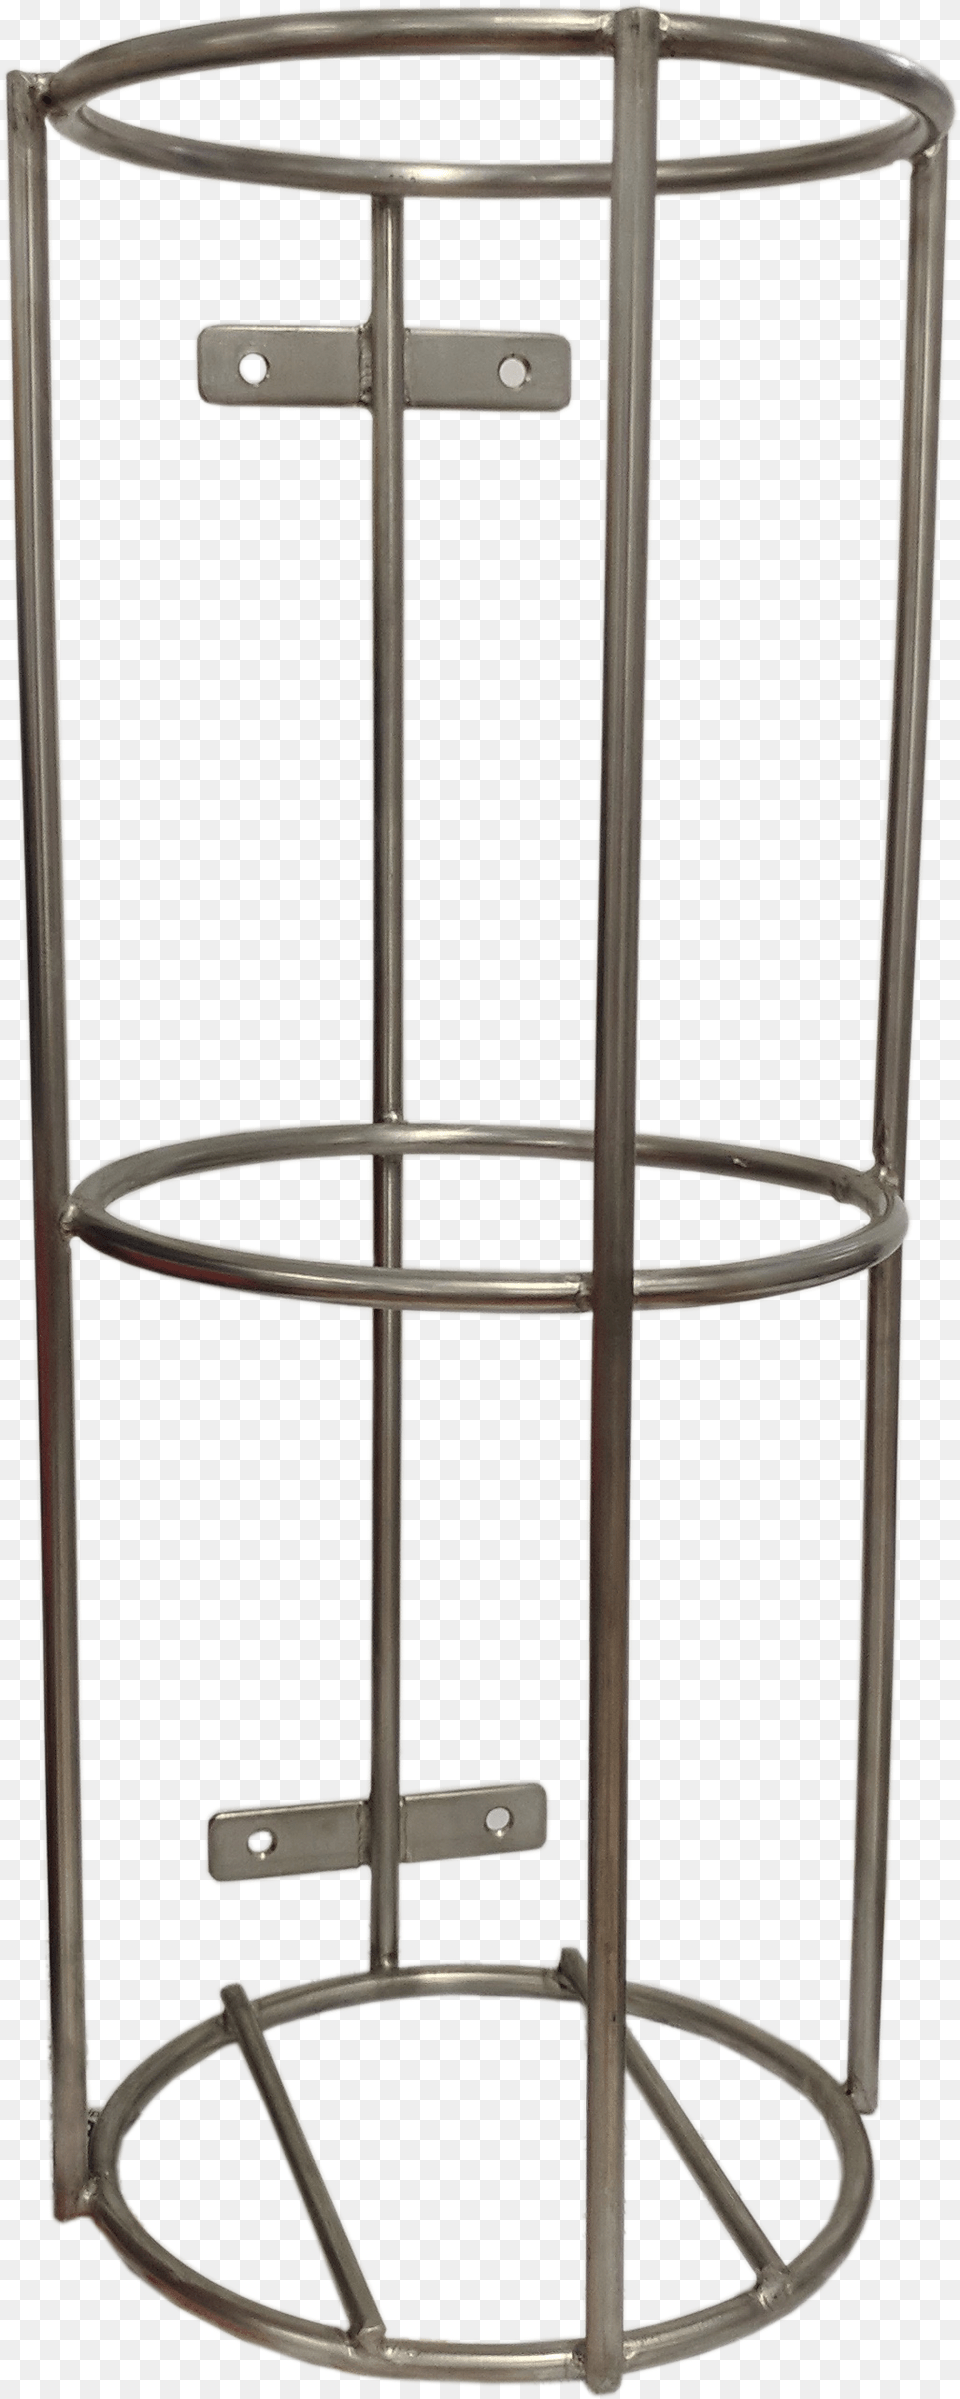 Stainless Steel C Shelf, Furniture Png Image